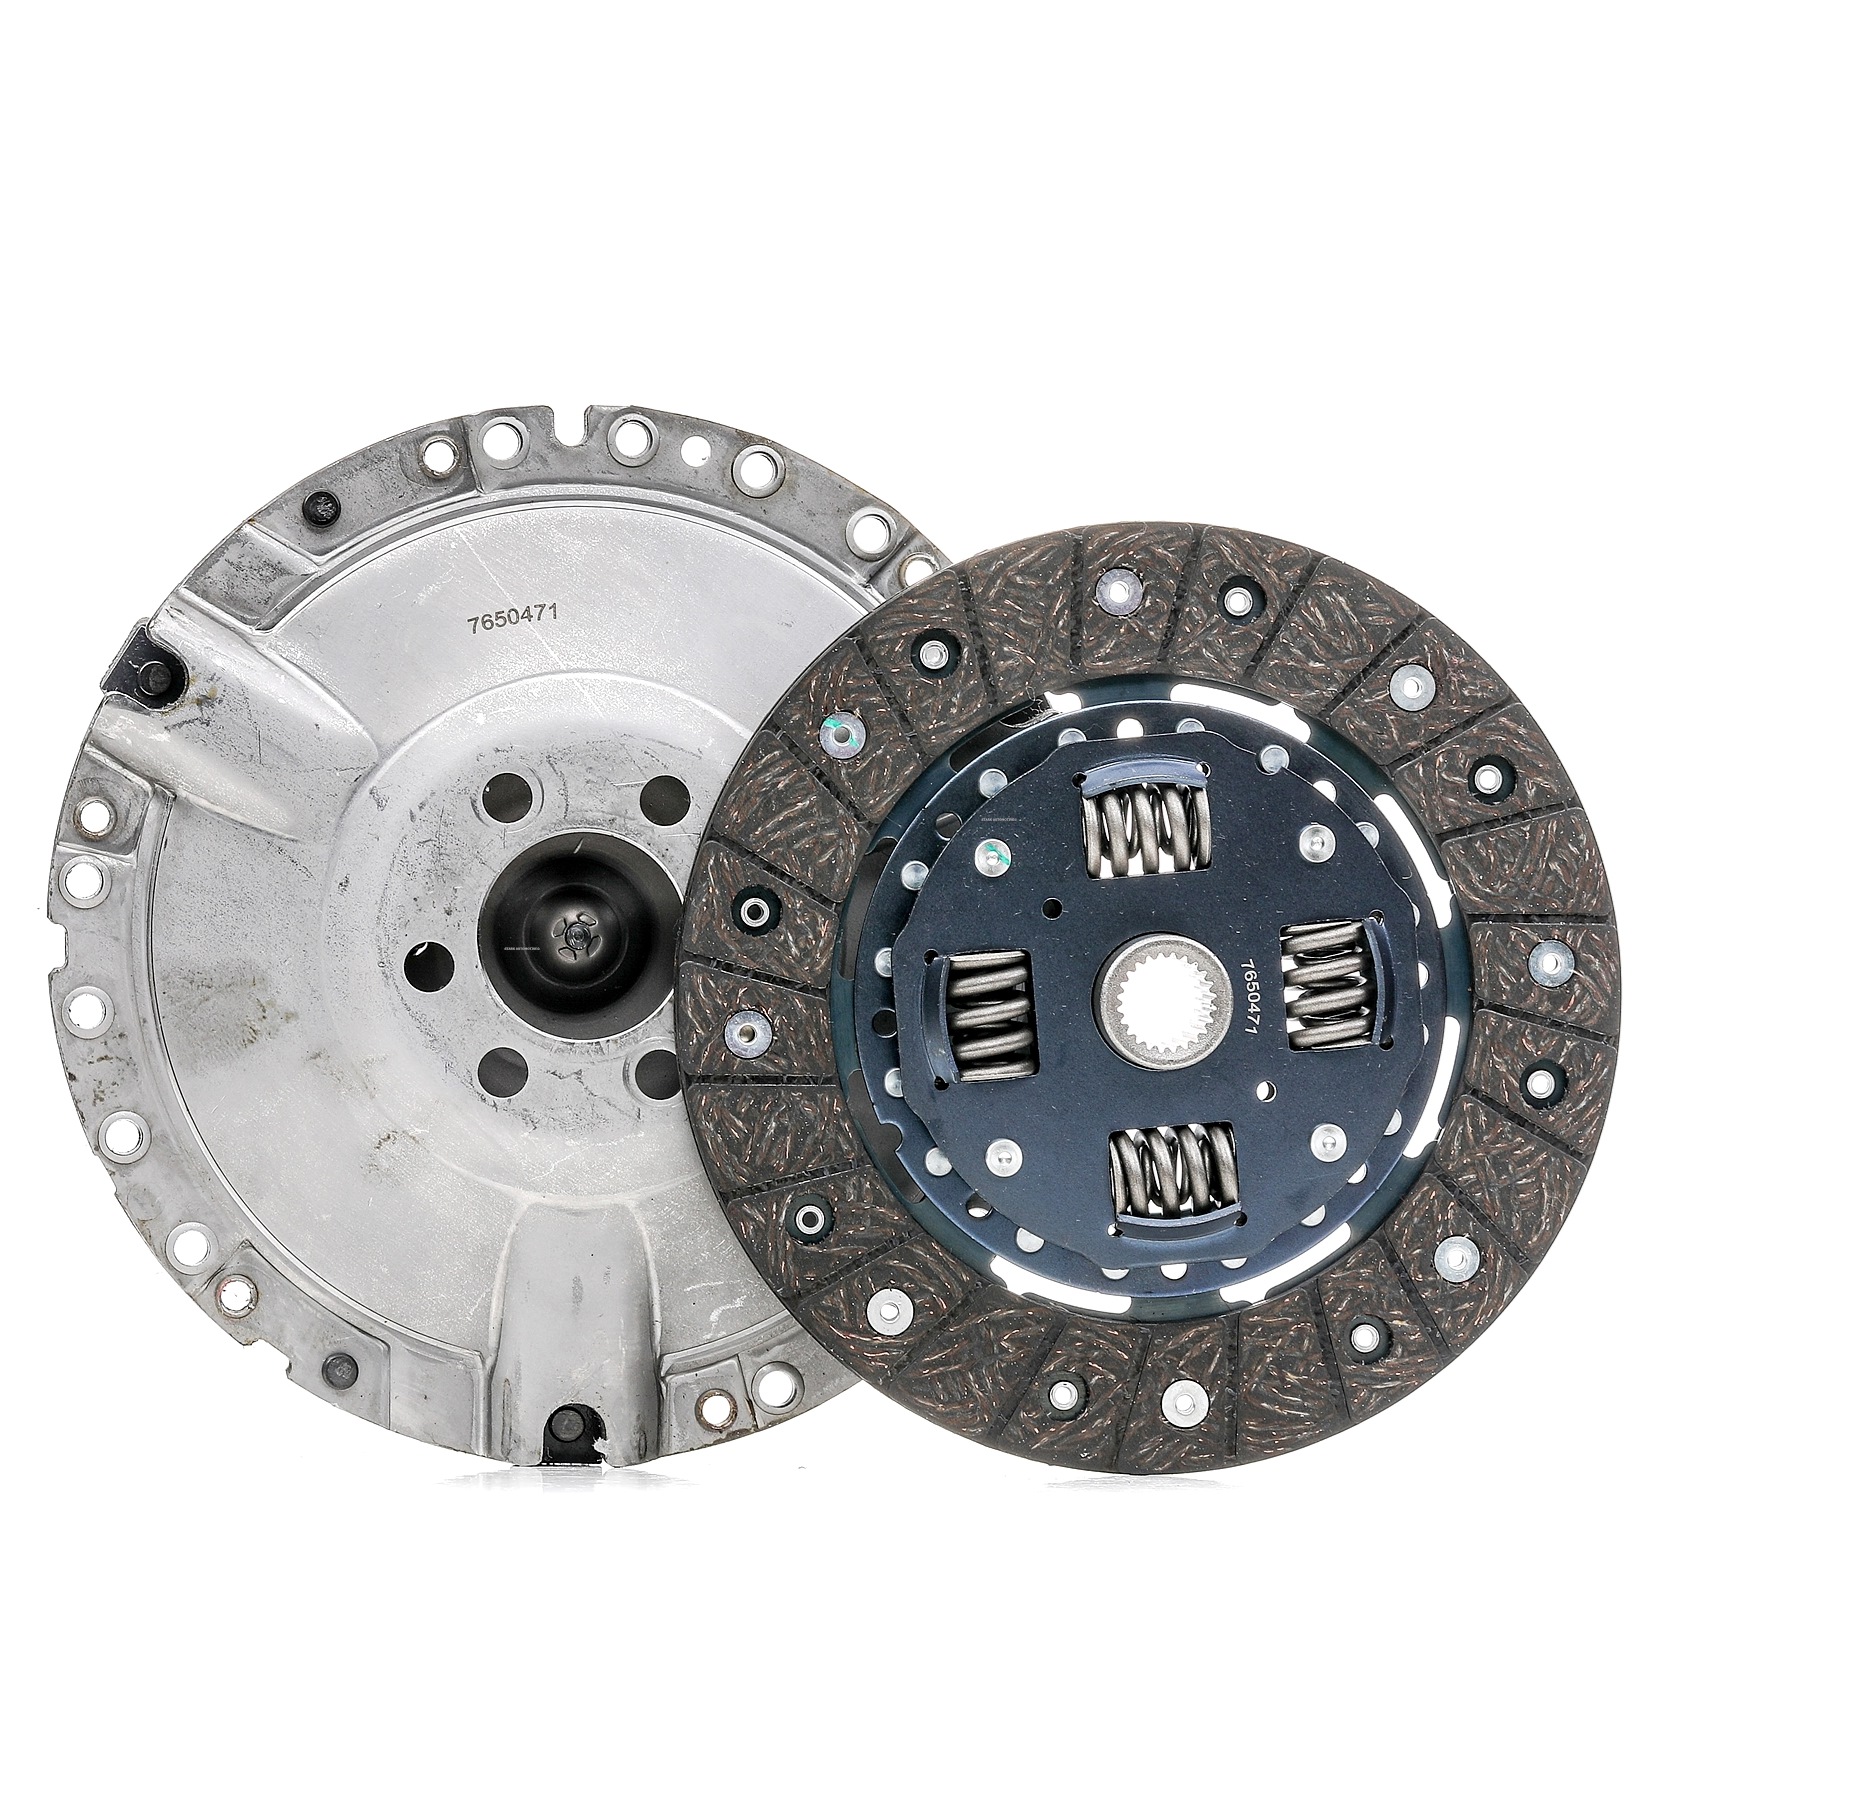 STARK SKCK-0100006 Clutch kit with clutch pressure plate, with clutch disc, without clutch release bearing, 200mm